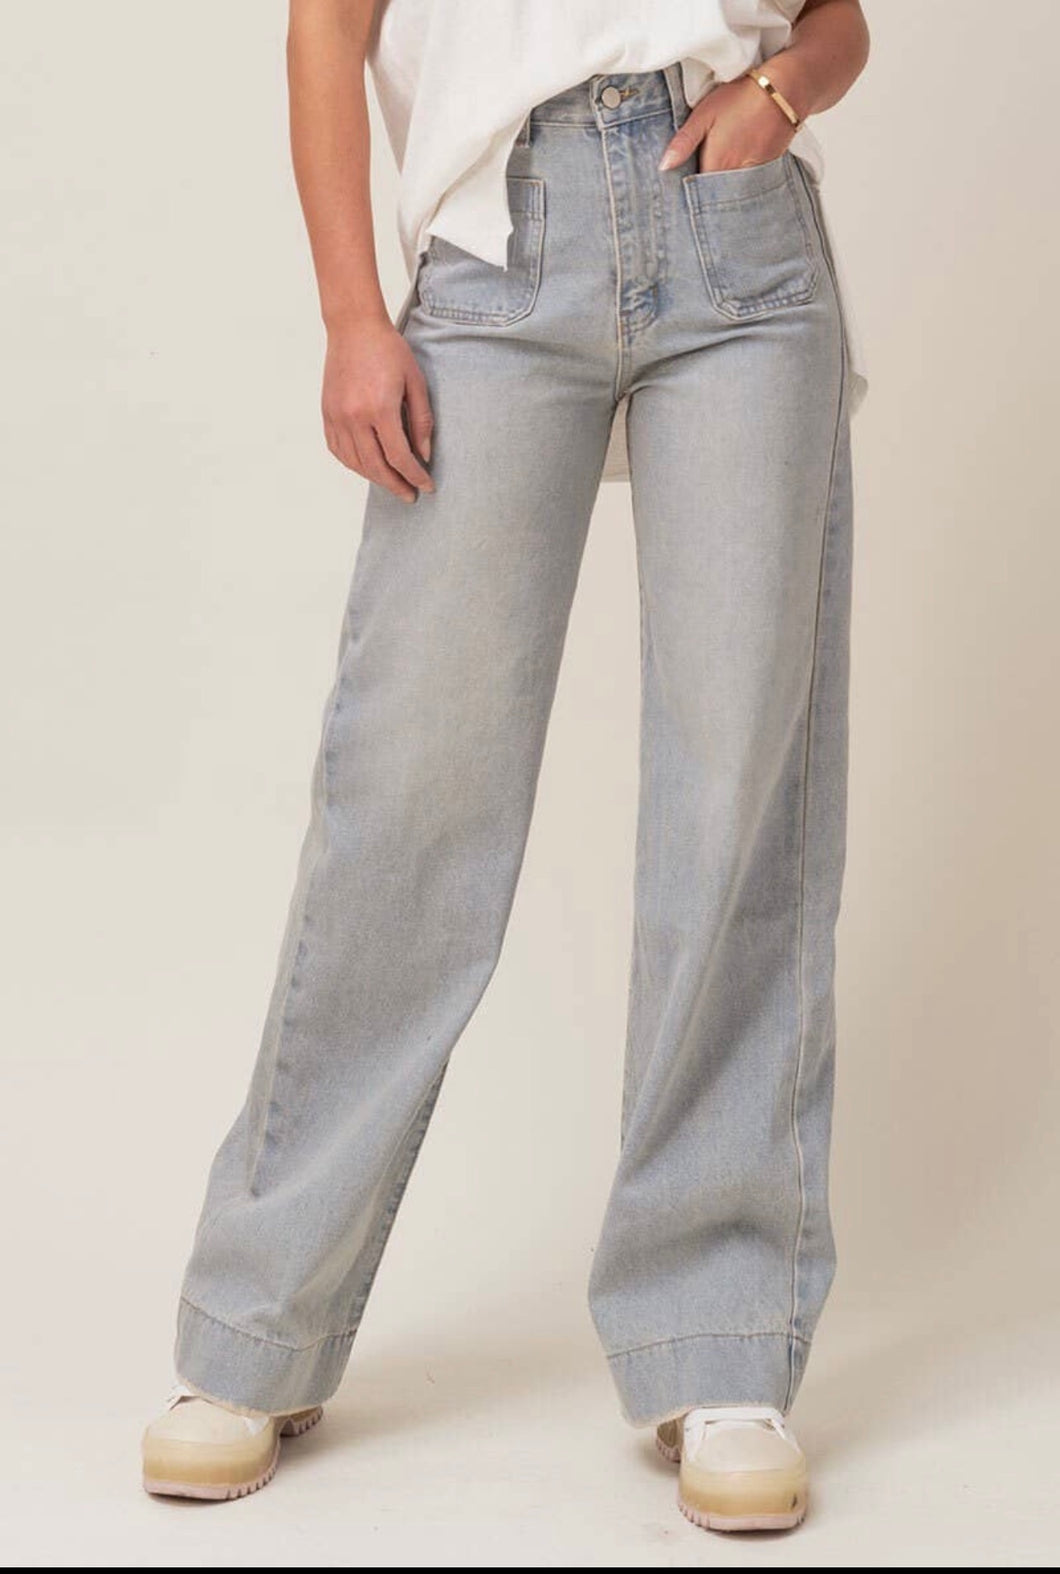 The Anthro Vintage Jeans